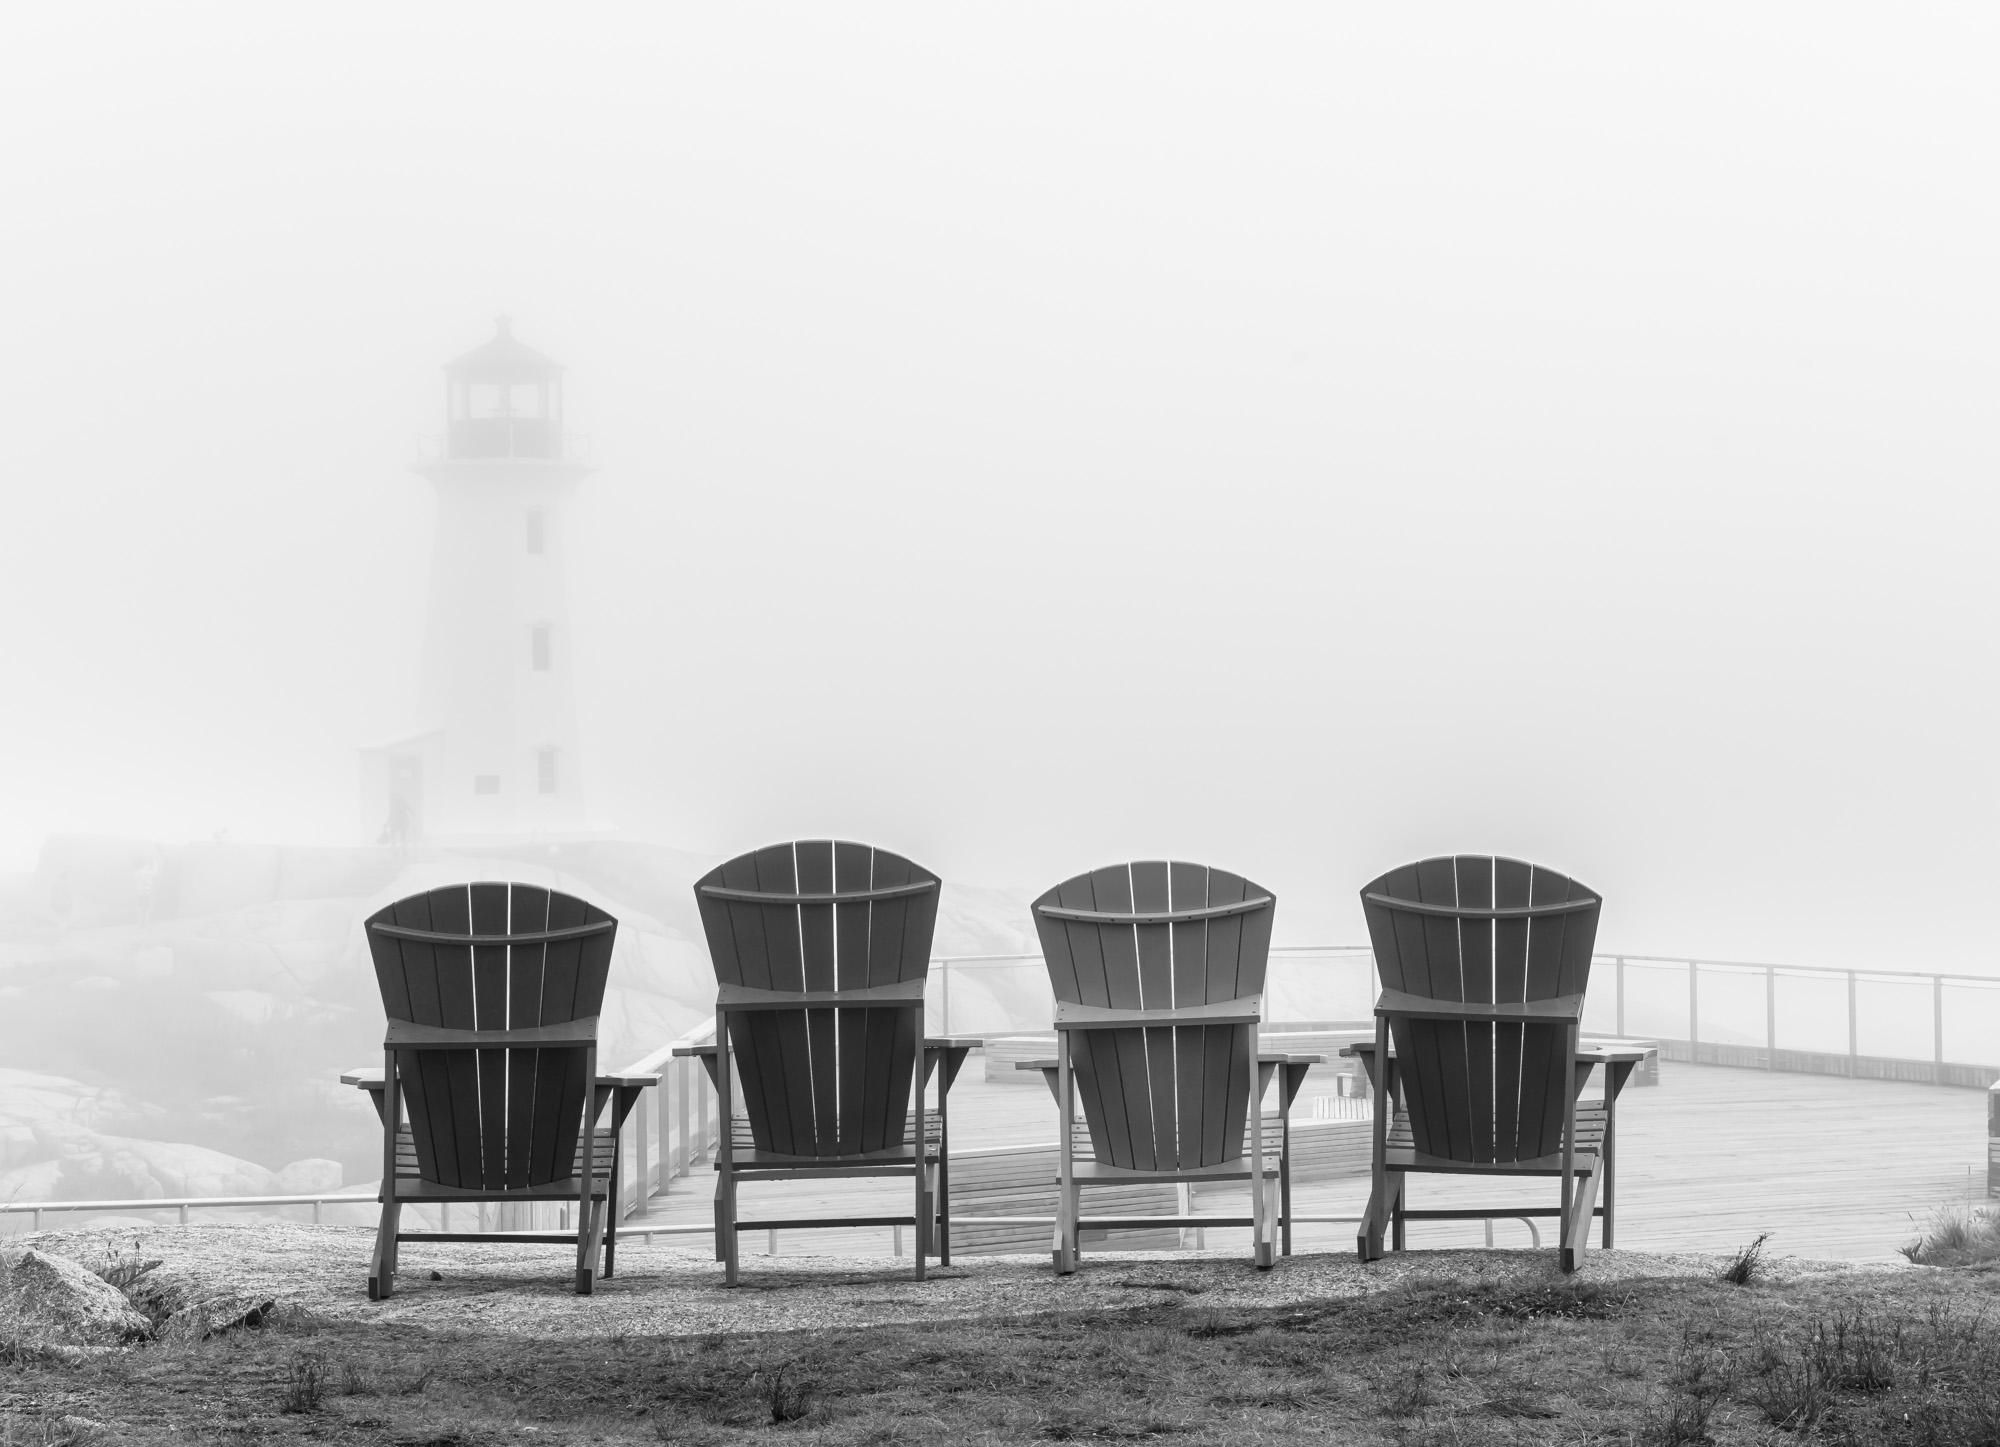  Limited Edition Black and White Photograph - " Lighthouse Fog " , 2022. Taken on a road trip through Nova Scotia, Canada. This is well known, Peggy's Cove in the fog.

About Howard Lewis:
Lewis’ artistic practice often explores science,